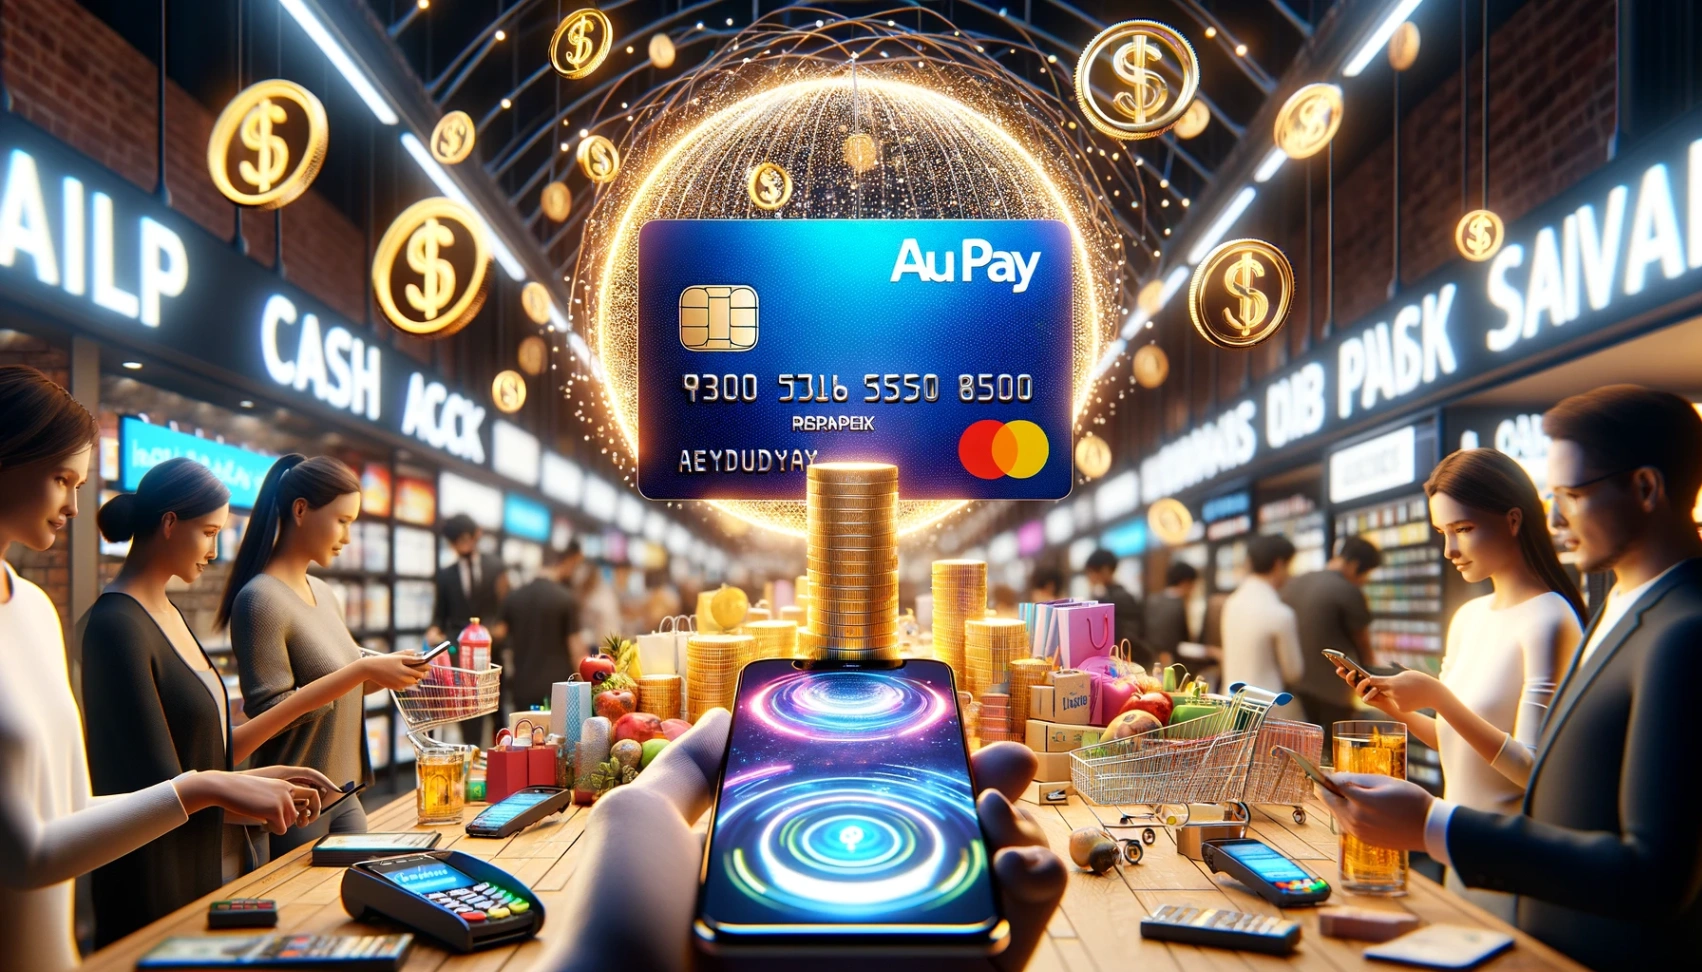 au PAY Prepaid Card - Learn How to Apply Online